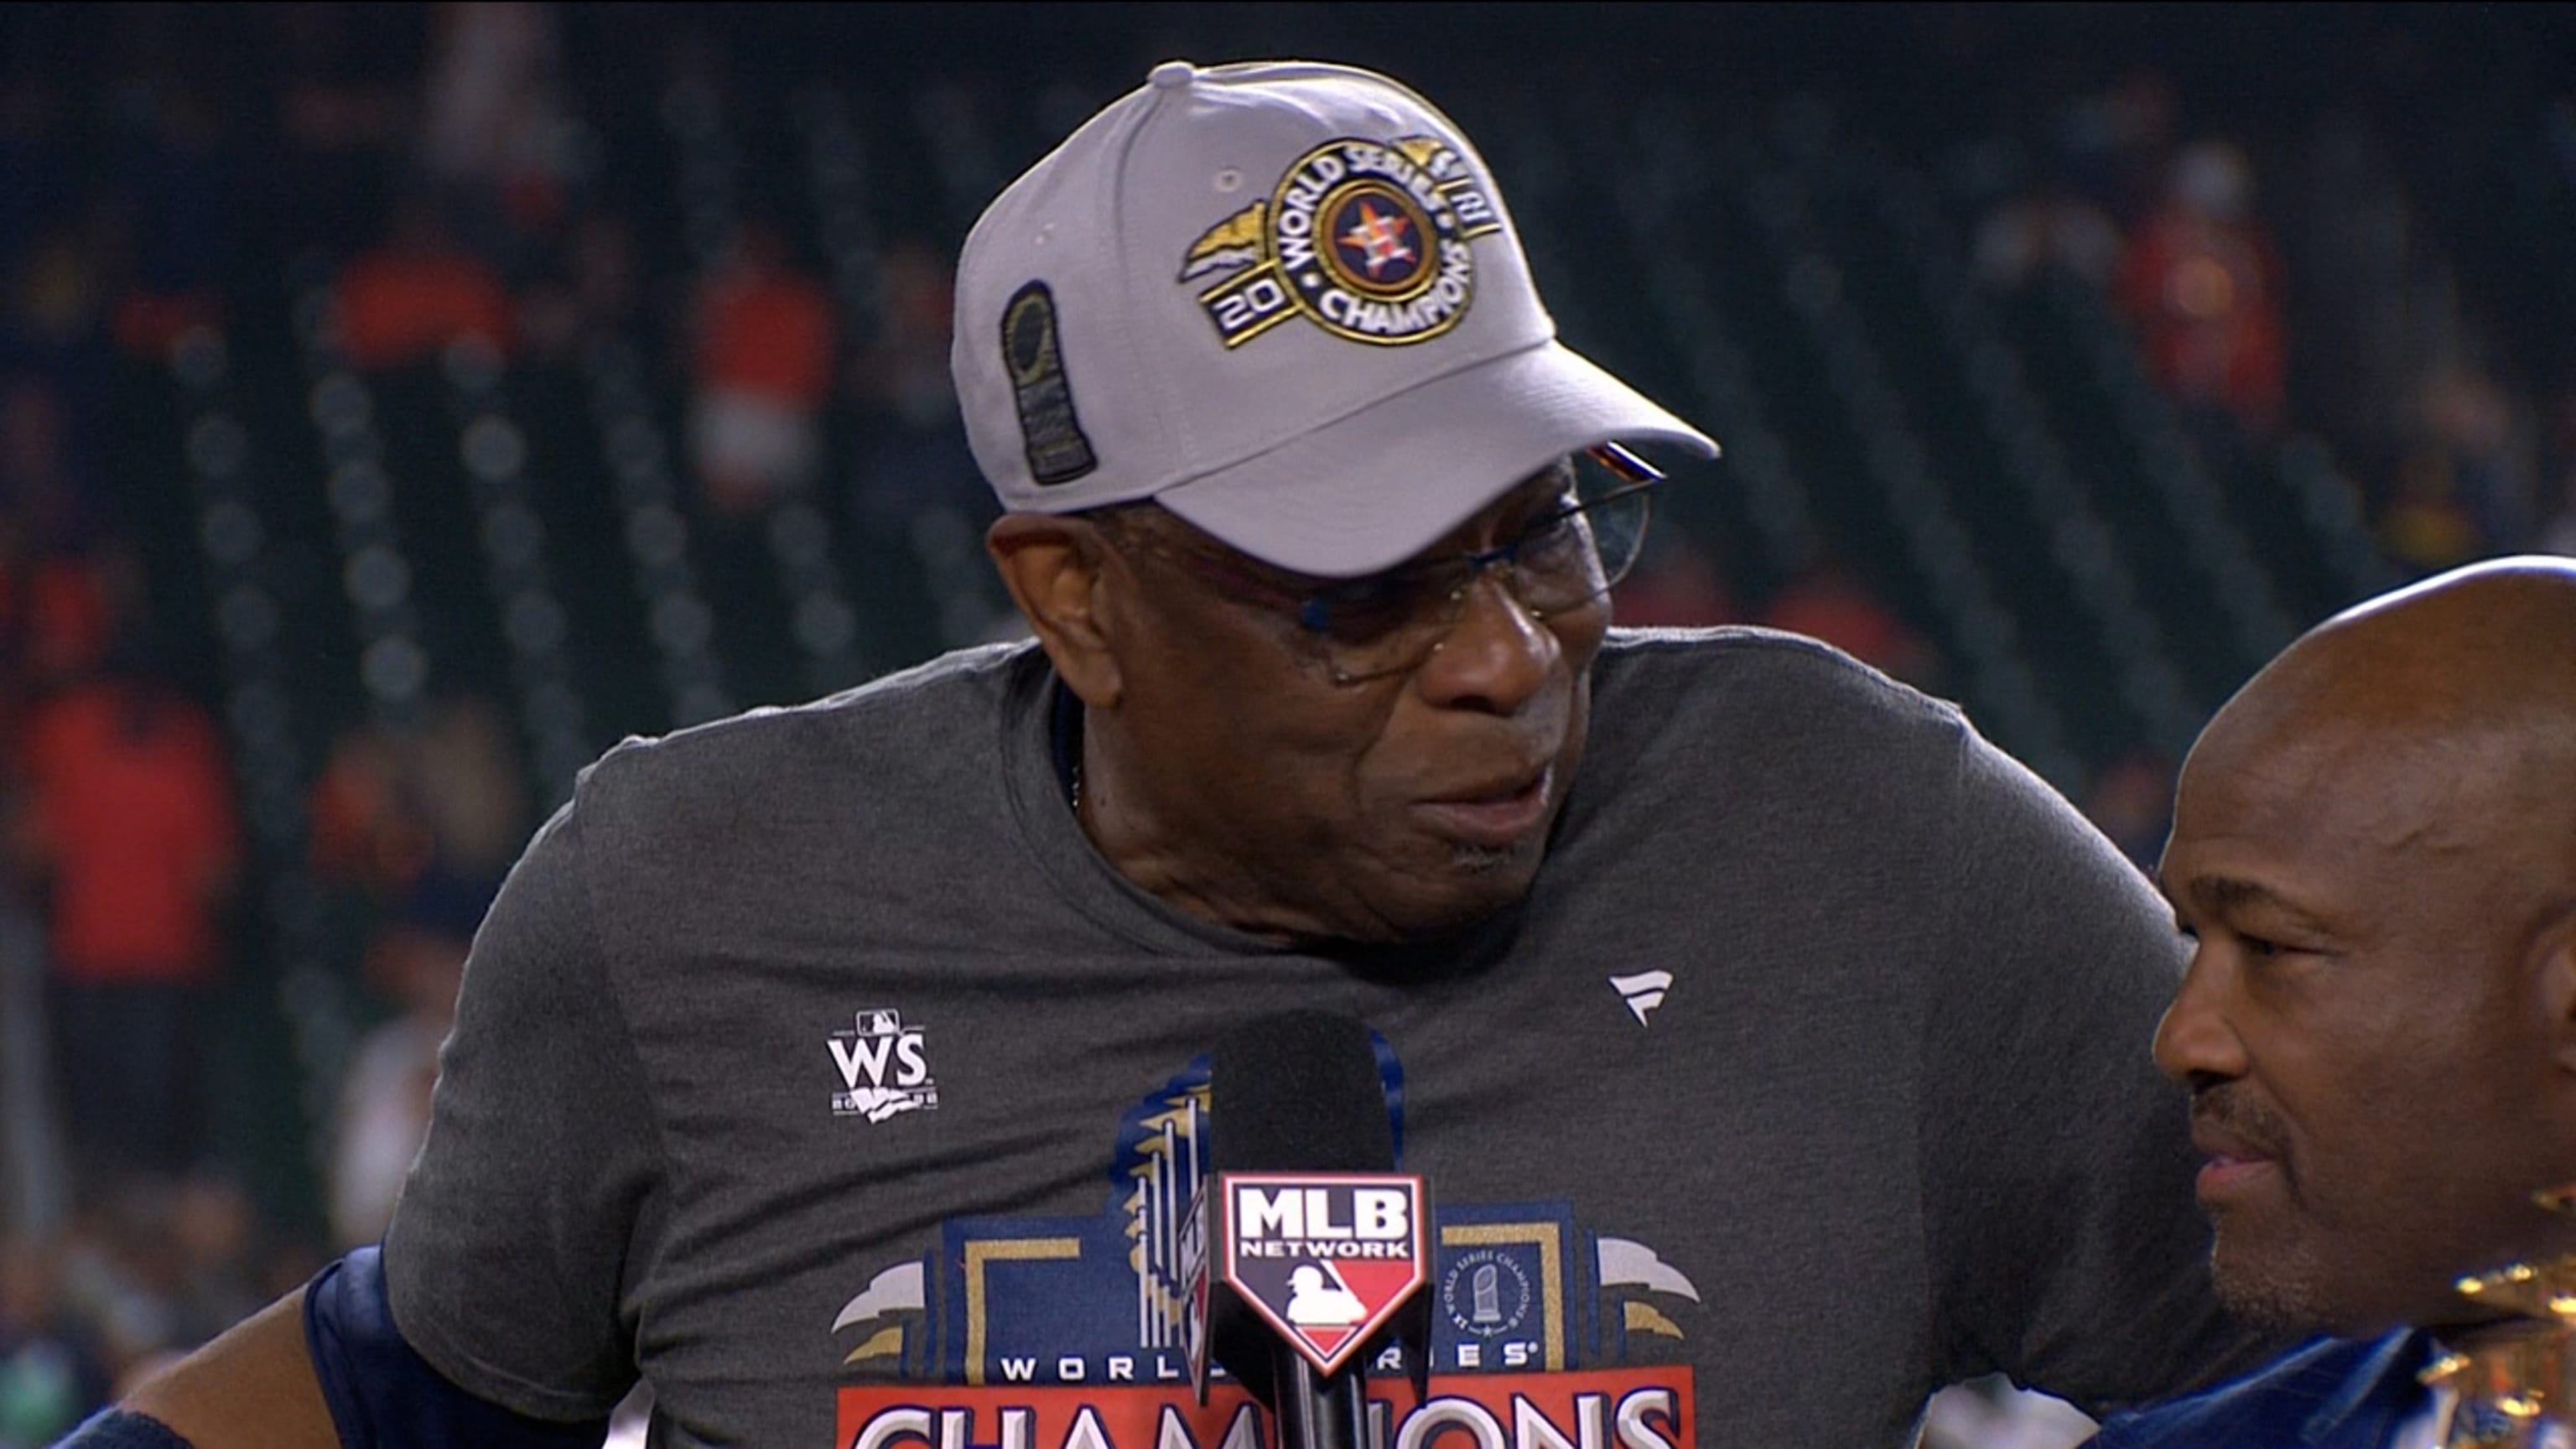 MLB - Dusty is in rare company winning the #WorldSeries as a player and  manager.